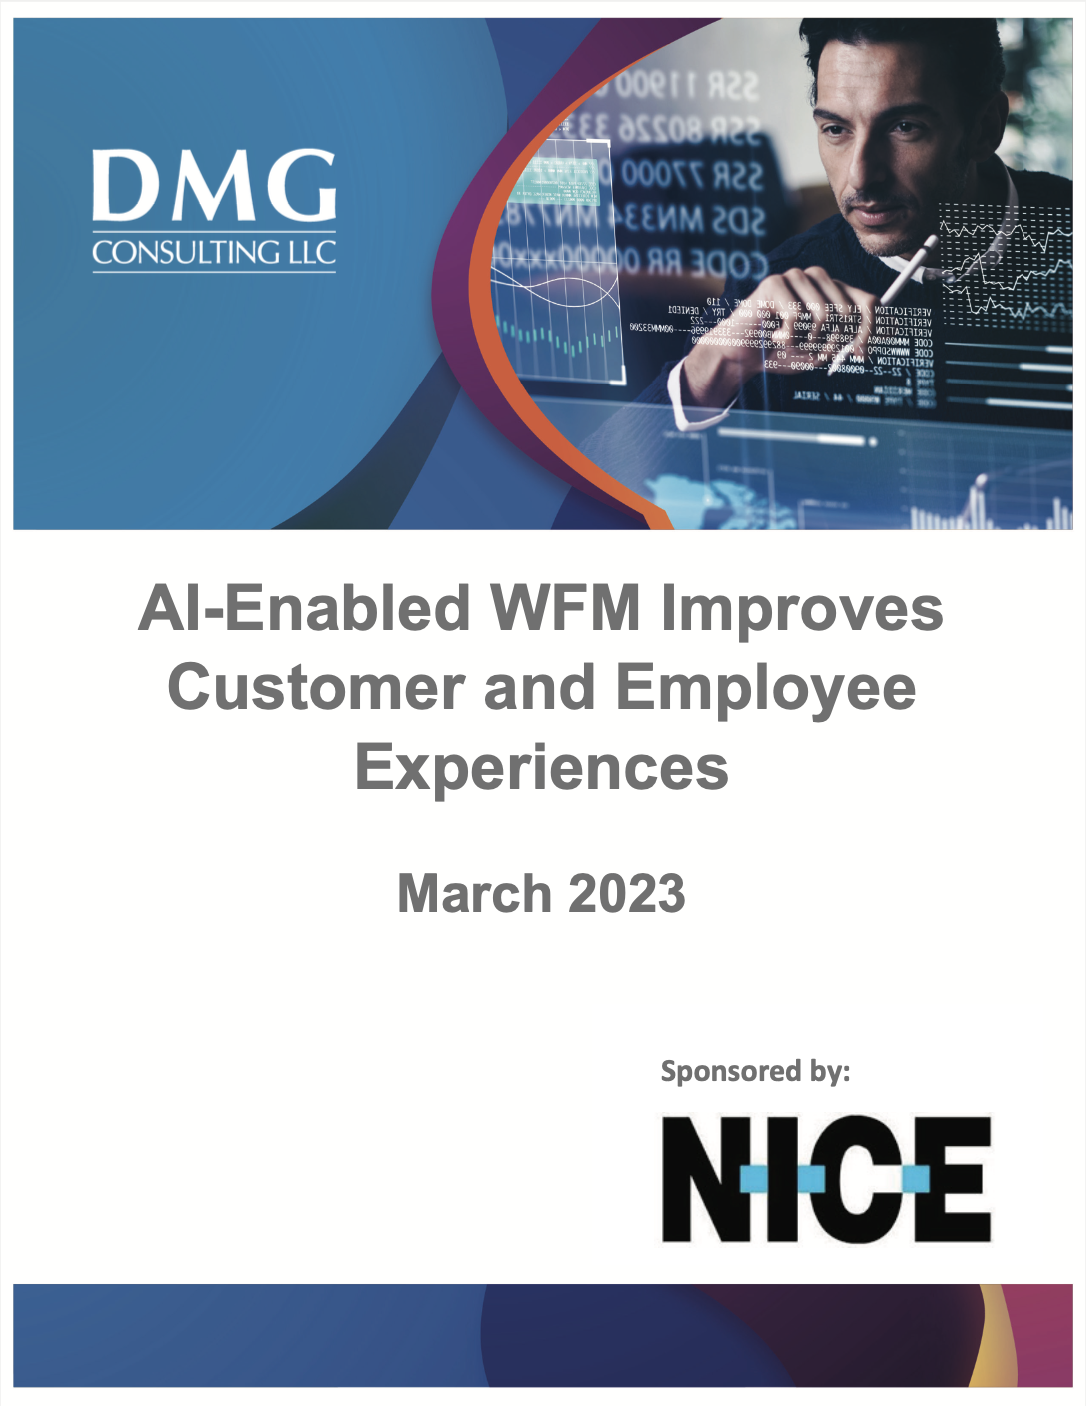 AI-Enabled WFM Improves Customer and Employee Experiences cover